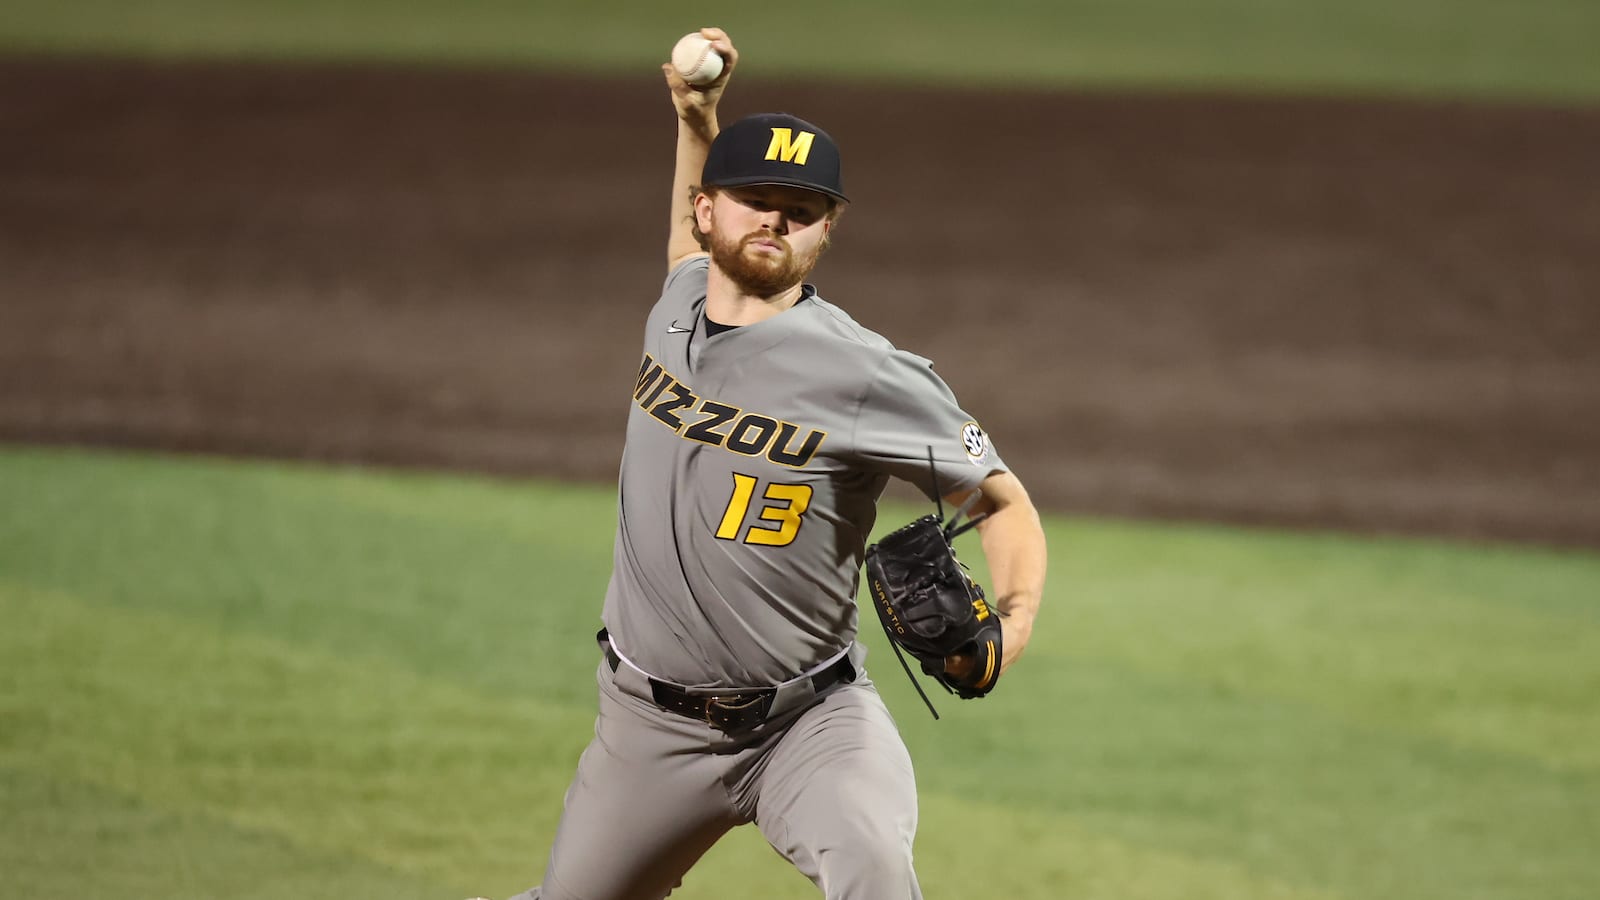 Missouri Baseball Gets Crushed in Series Opener with No. 3 Tennessee